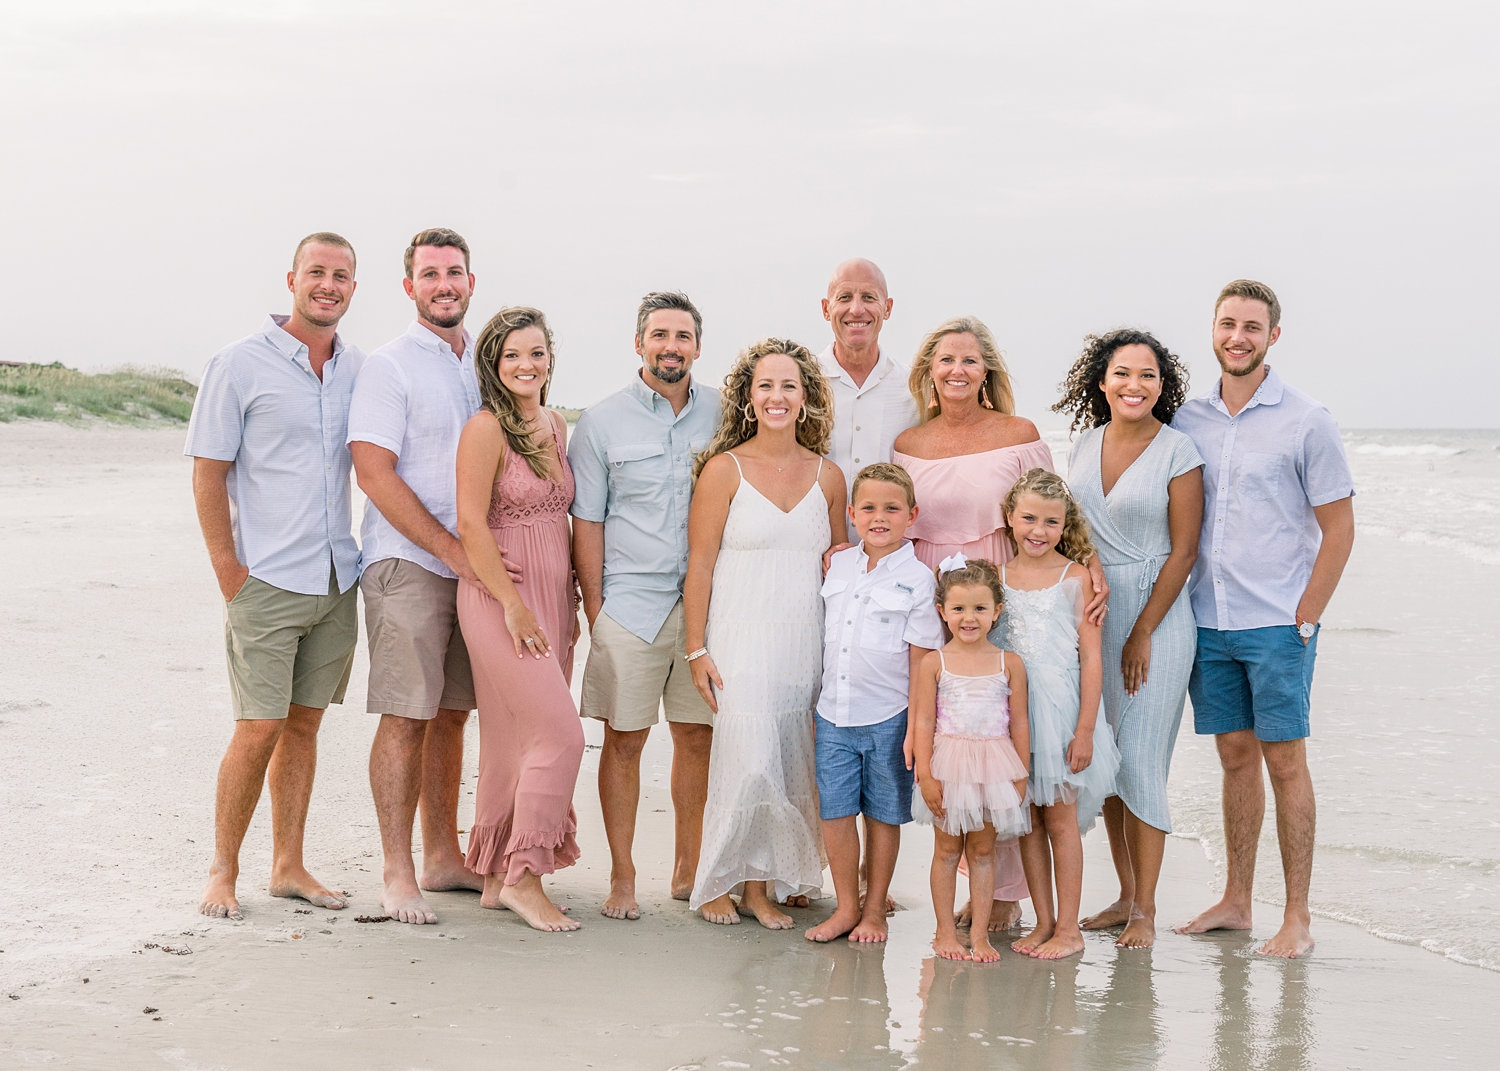 extended family pictures, extended family portrait photography, Rya Duncklee Photos